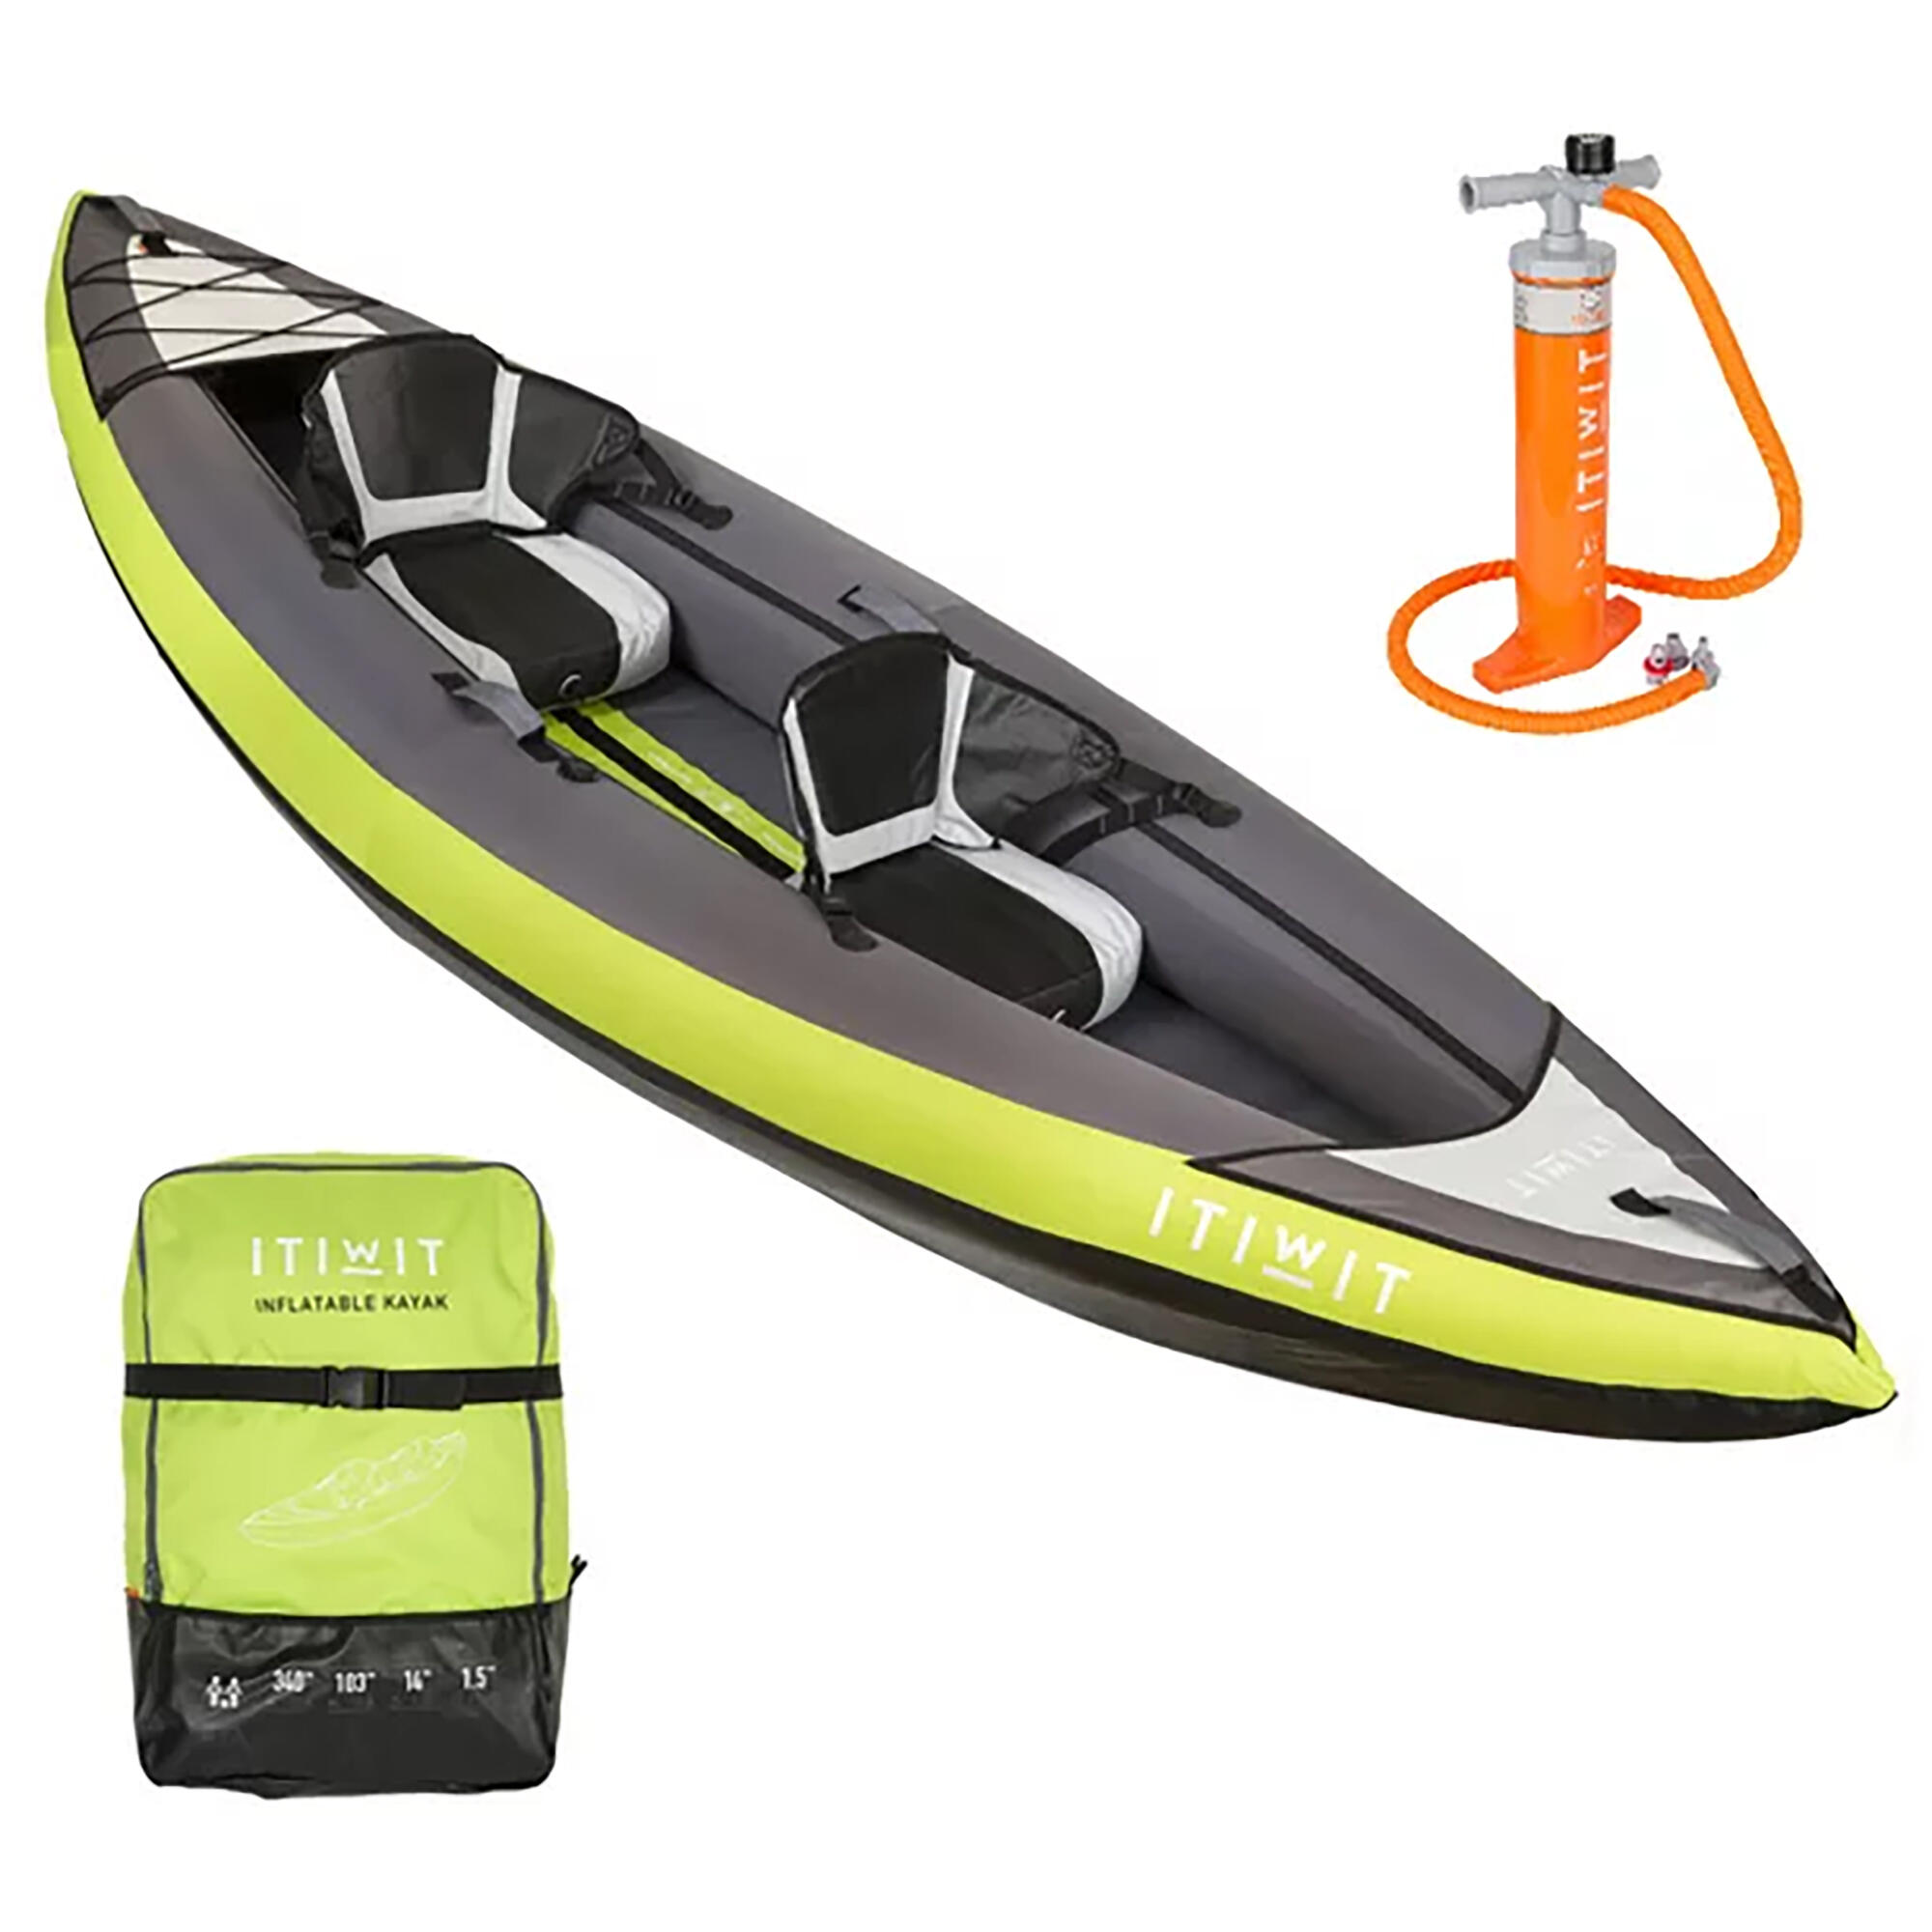 Itiwit Inflatable Touring Kayak w/ Pump 2 person 1/8